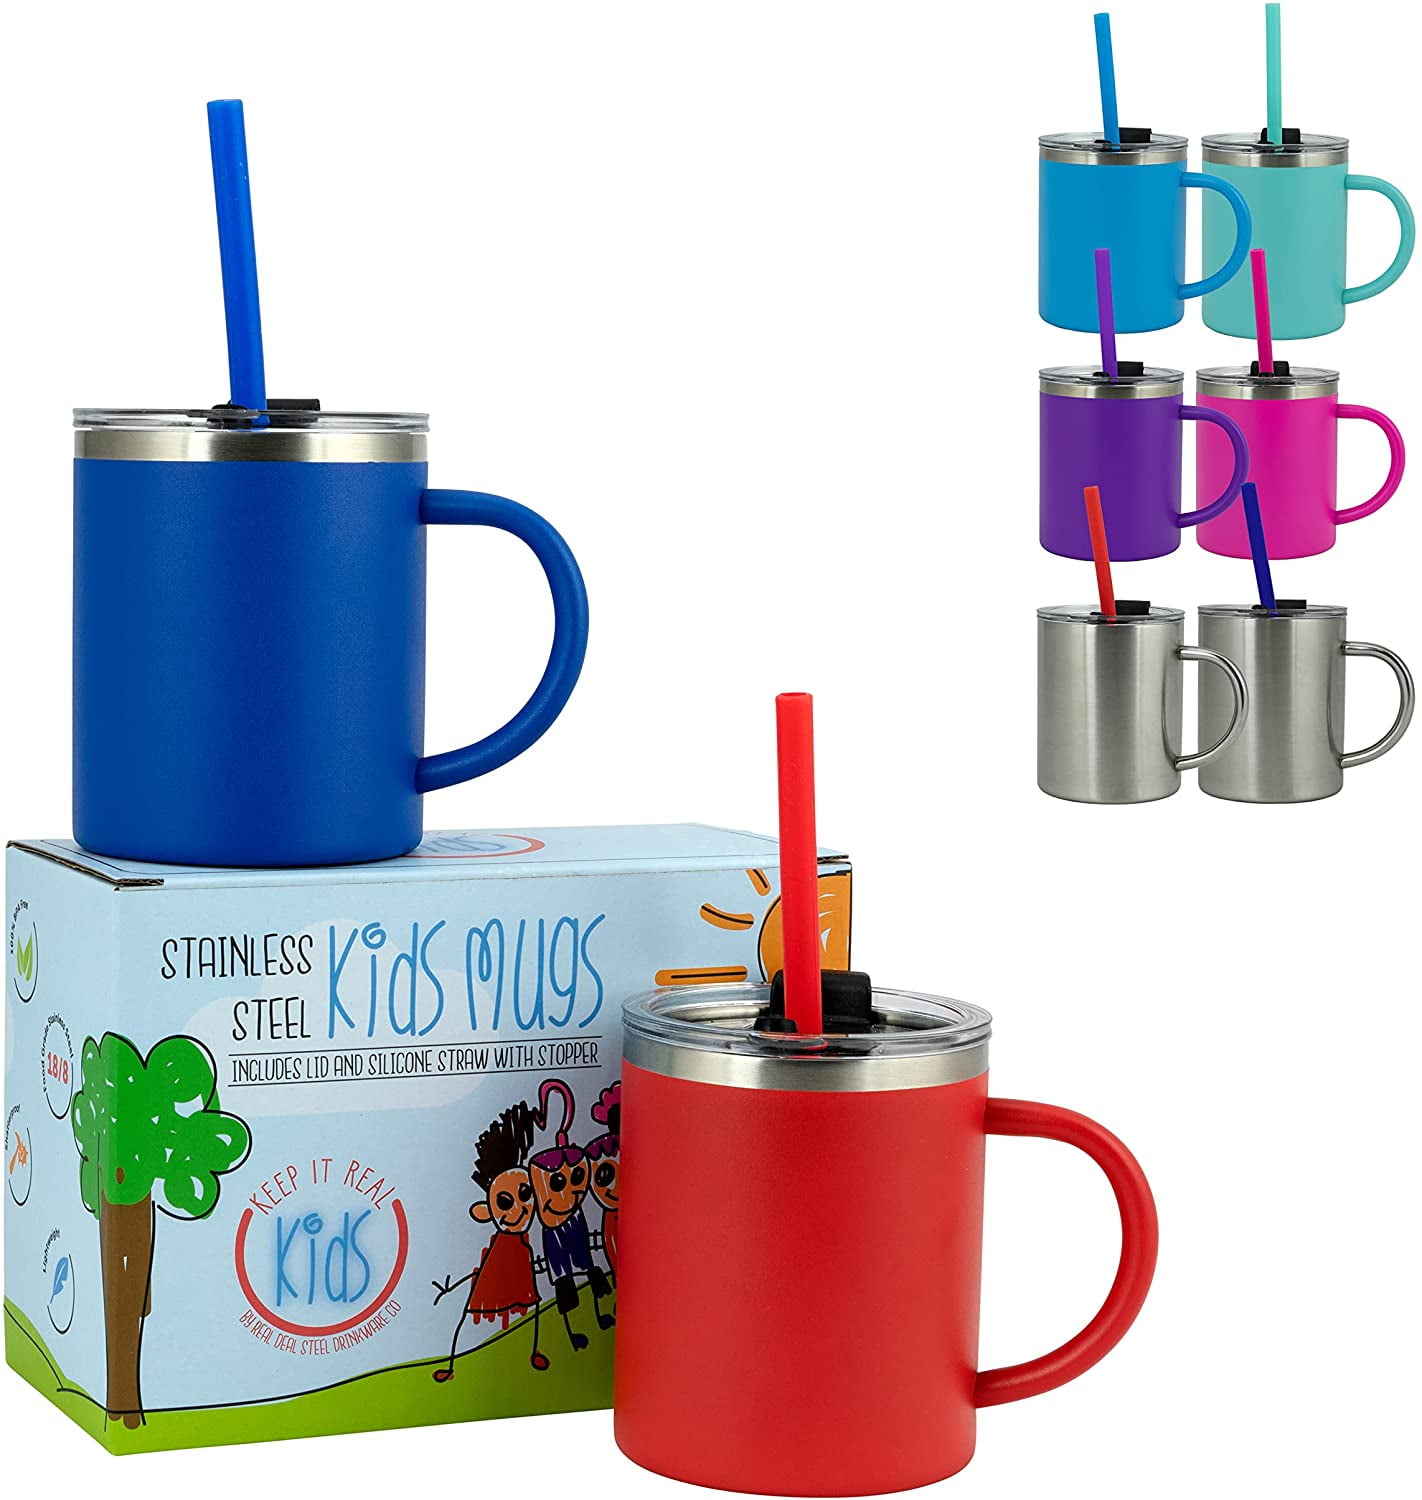 More Than Just A Cup: Kids' Cups Build Brands While Preventing